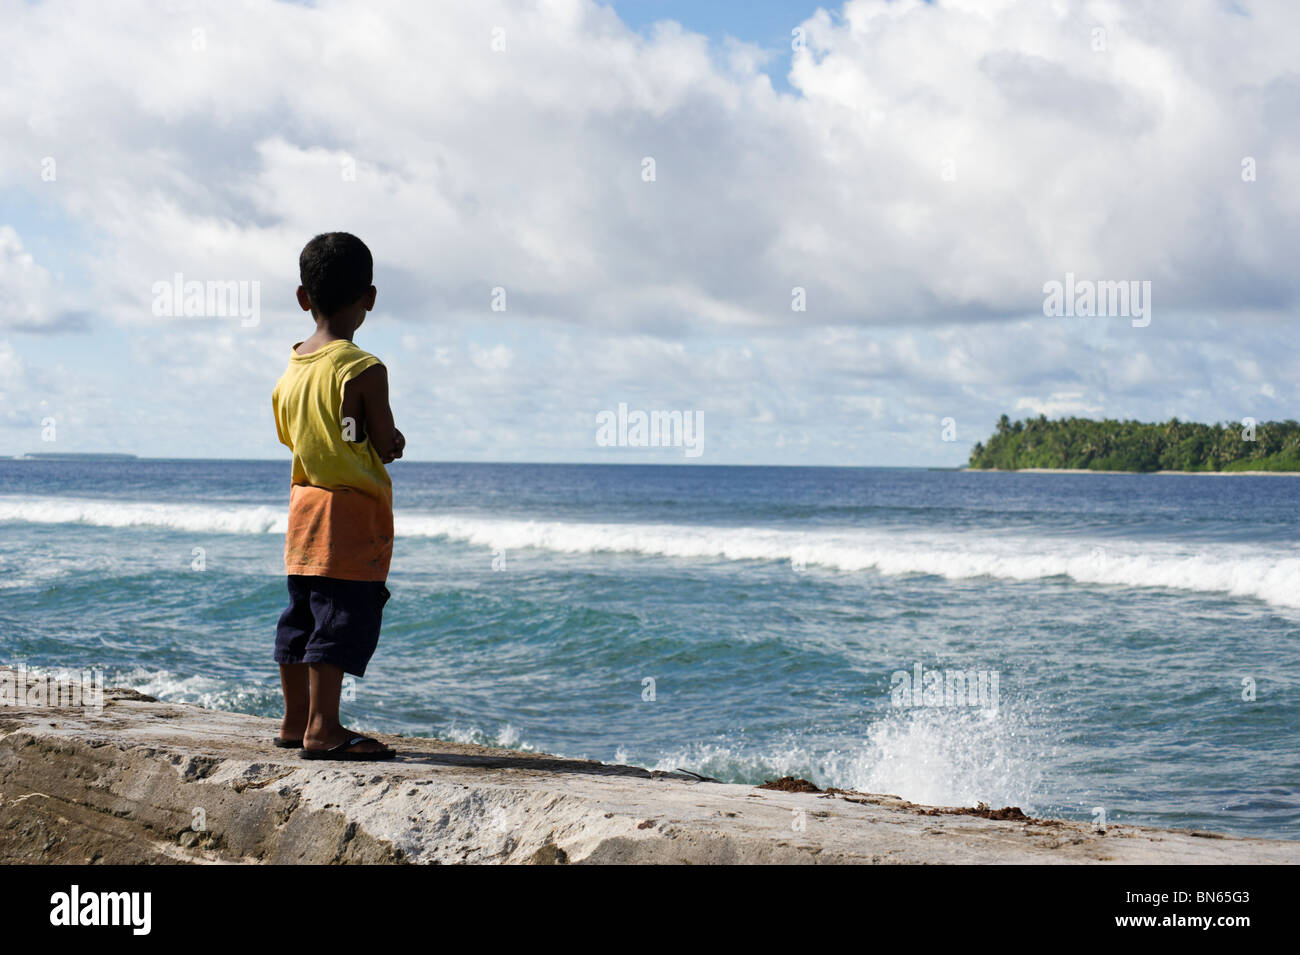 Boy on the seawall watching the incoming tide, Jabor, Jaluit, Marshall Islands. Stock Photo